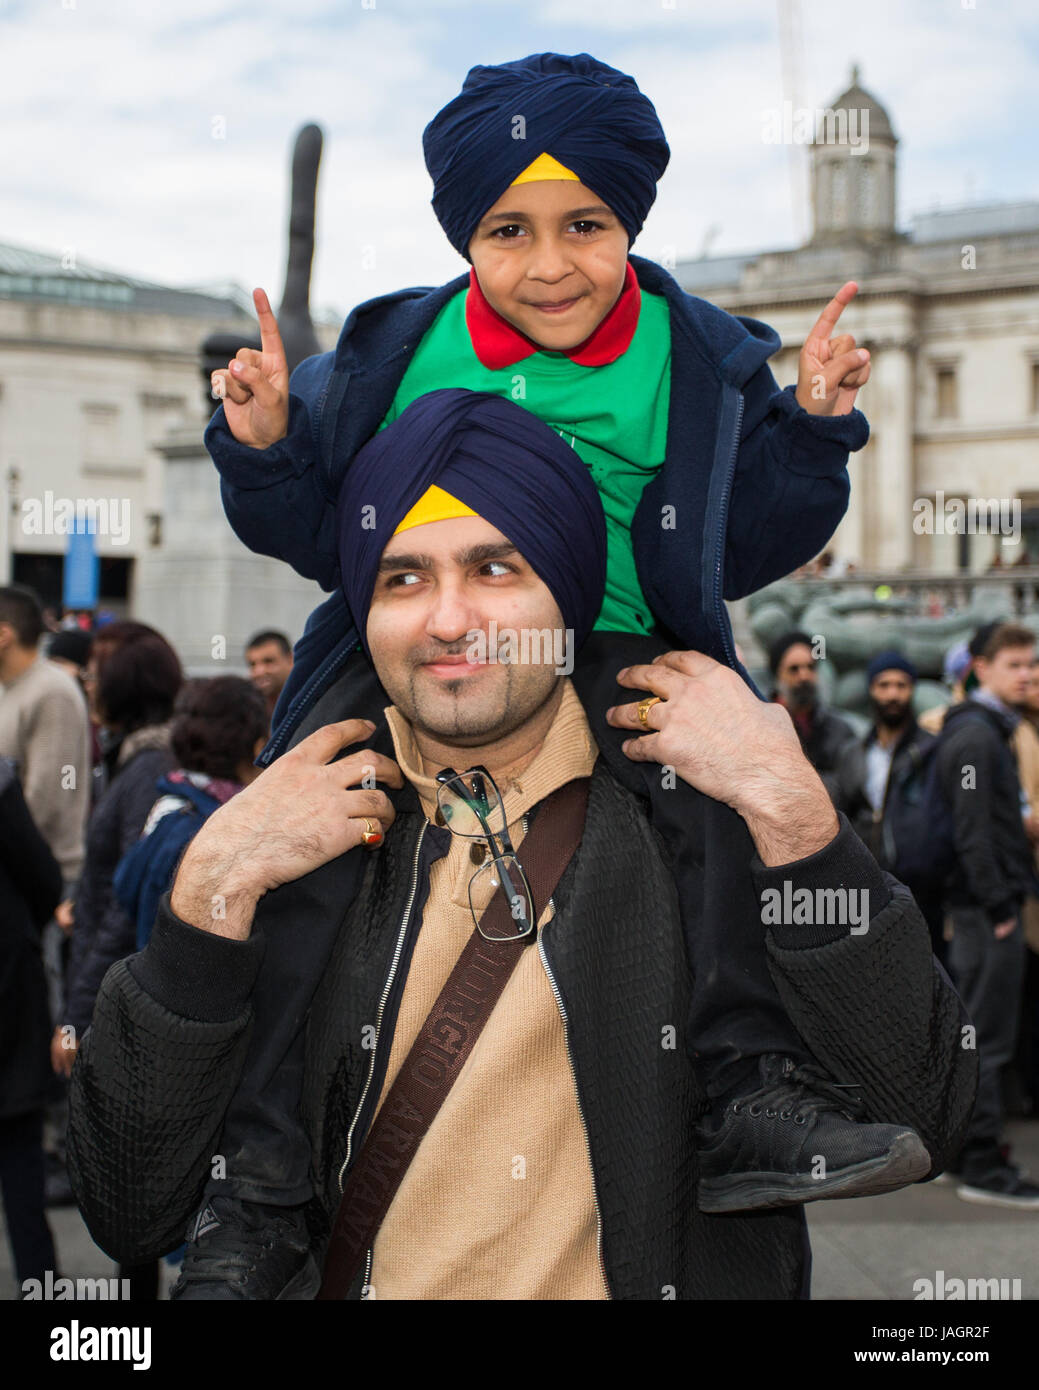 Aisakhi attends a celebration of Sikh & Punjabi culture in Trafalgar Square for the Sikh New Year  Featuring: Atmosphere, View Where: London, United Kingdom When: 29 Apr 2017 Credit: Wheatley/WENN Stock Photo